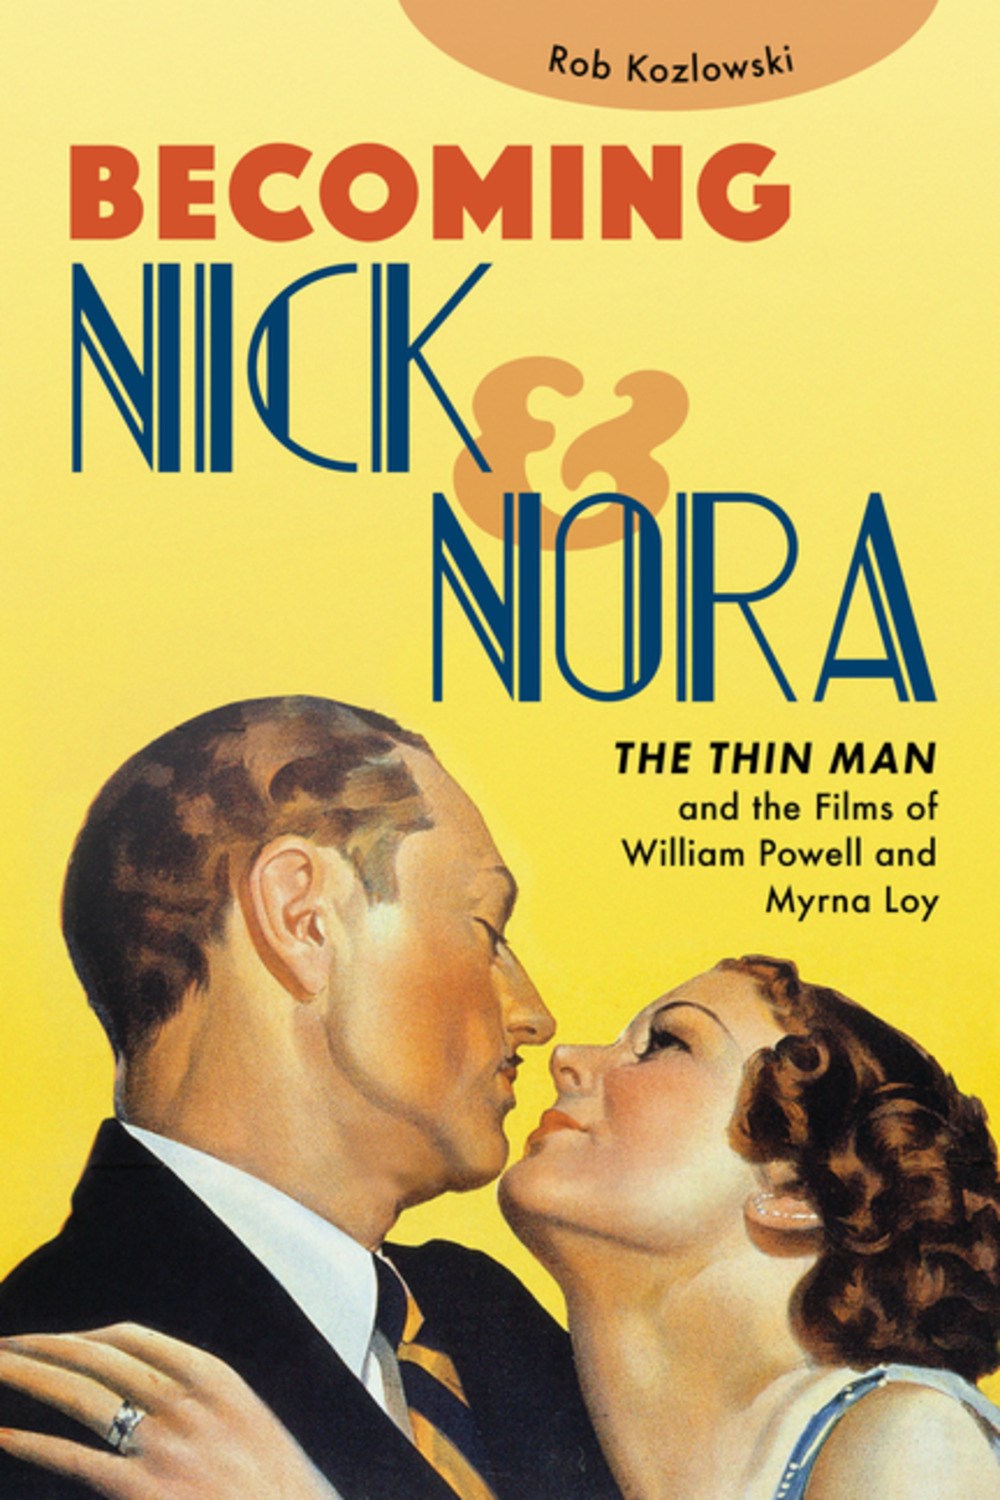 Becoming Nick and Nora: The Thin Man and the Films of William Powell and Myrna Loy